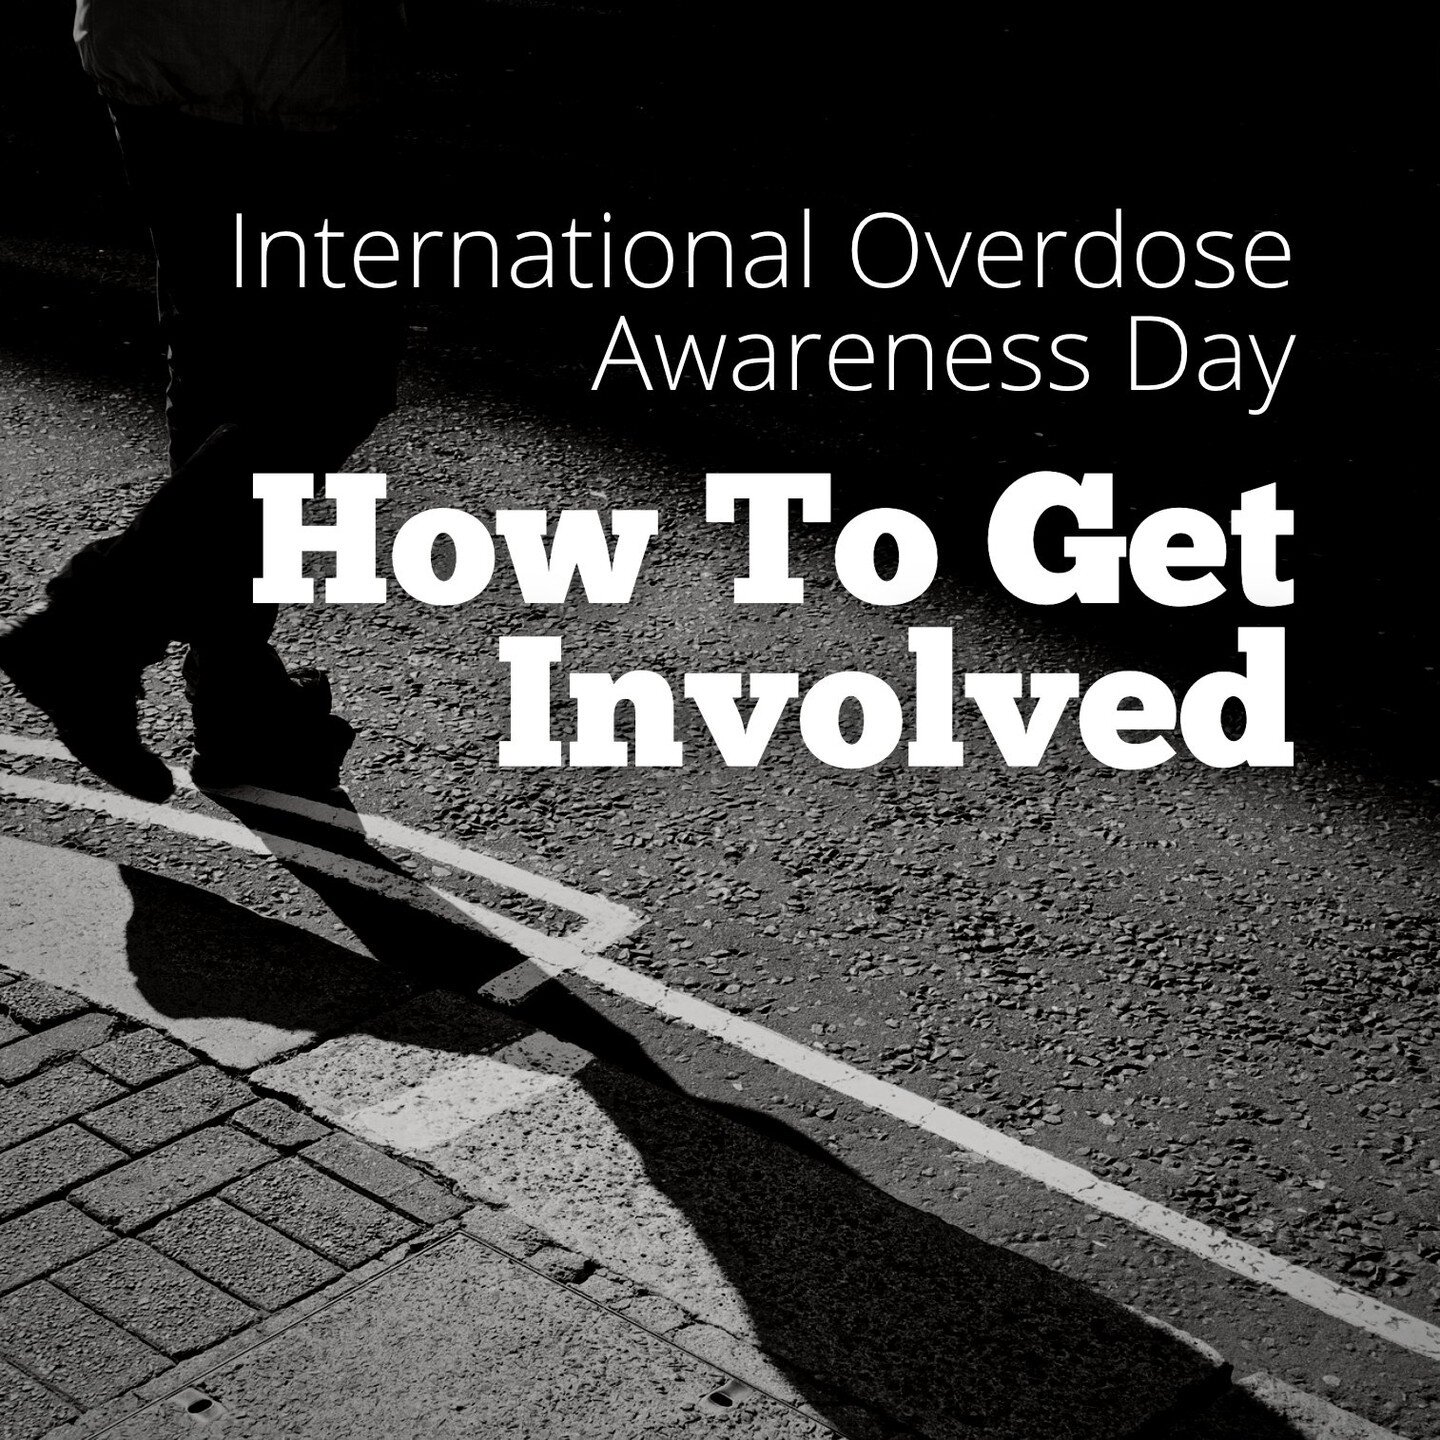 International Overdose Awareness Day is right around the corner! Join us Wednesday, August 31st as we remember without stigma those who have lost their lives to substance use, and acknowledge the grief of family and friends left behind.⁠
⁠
This year 